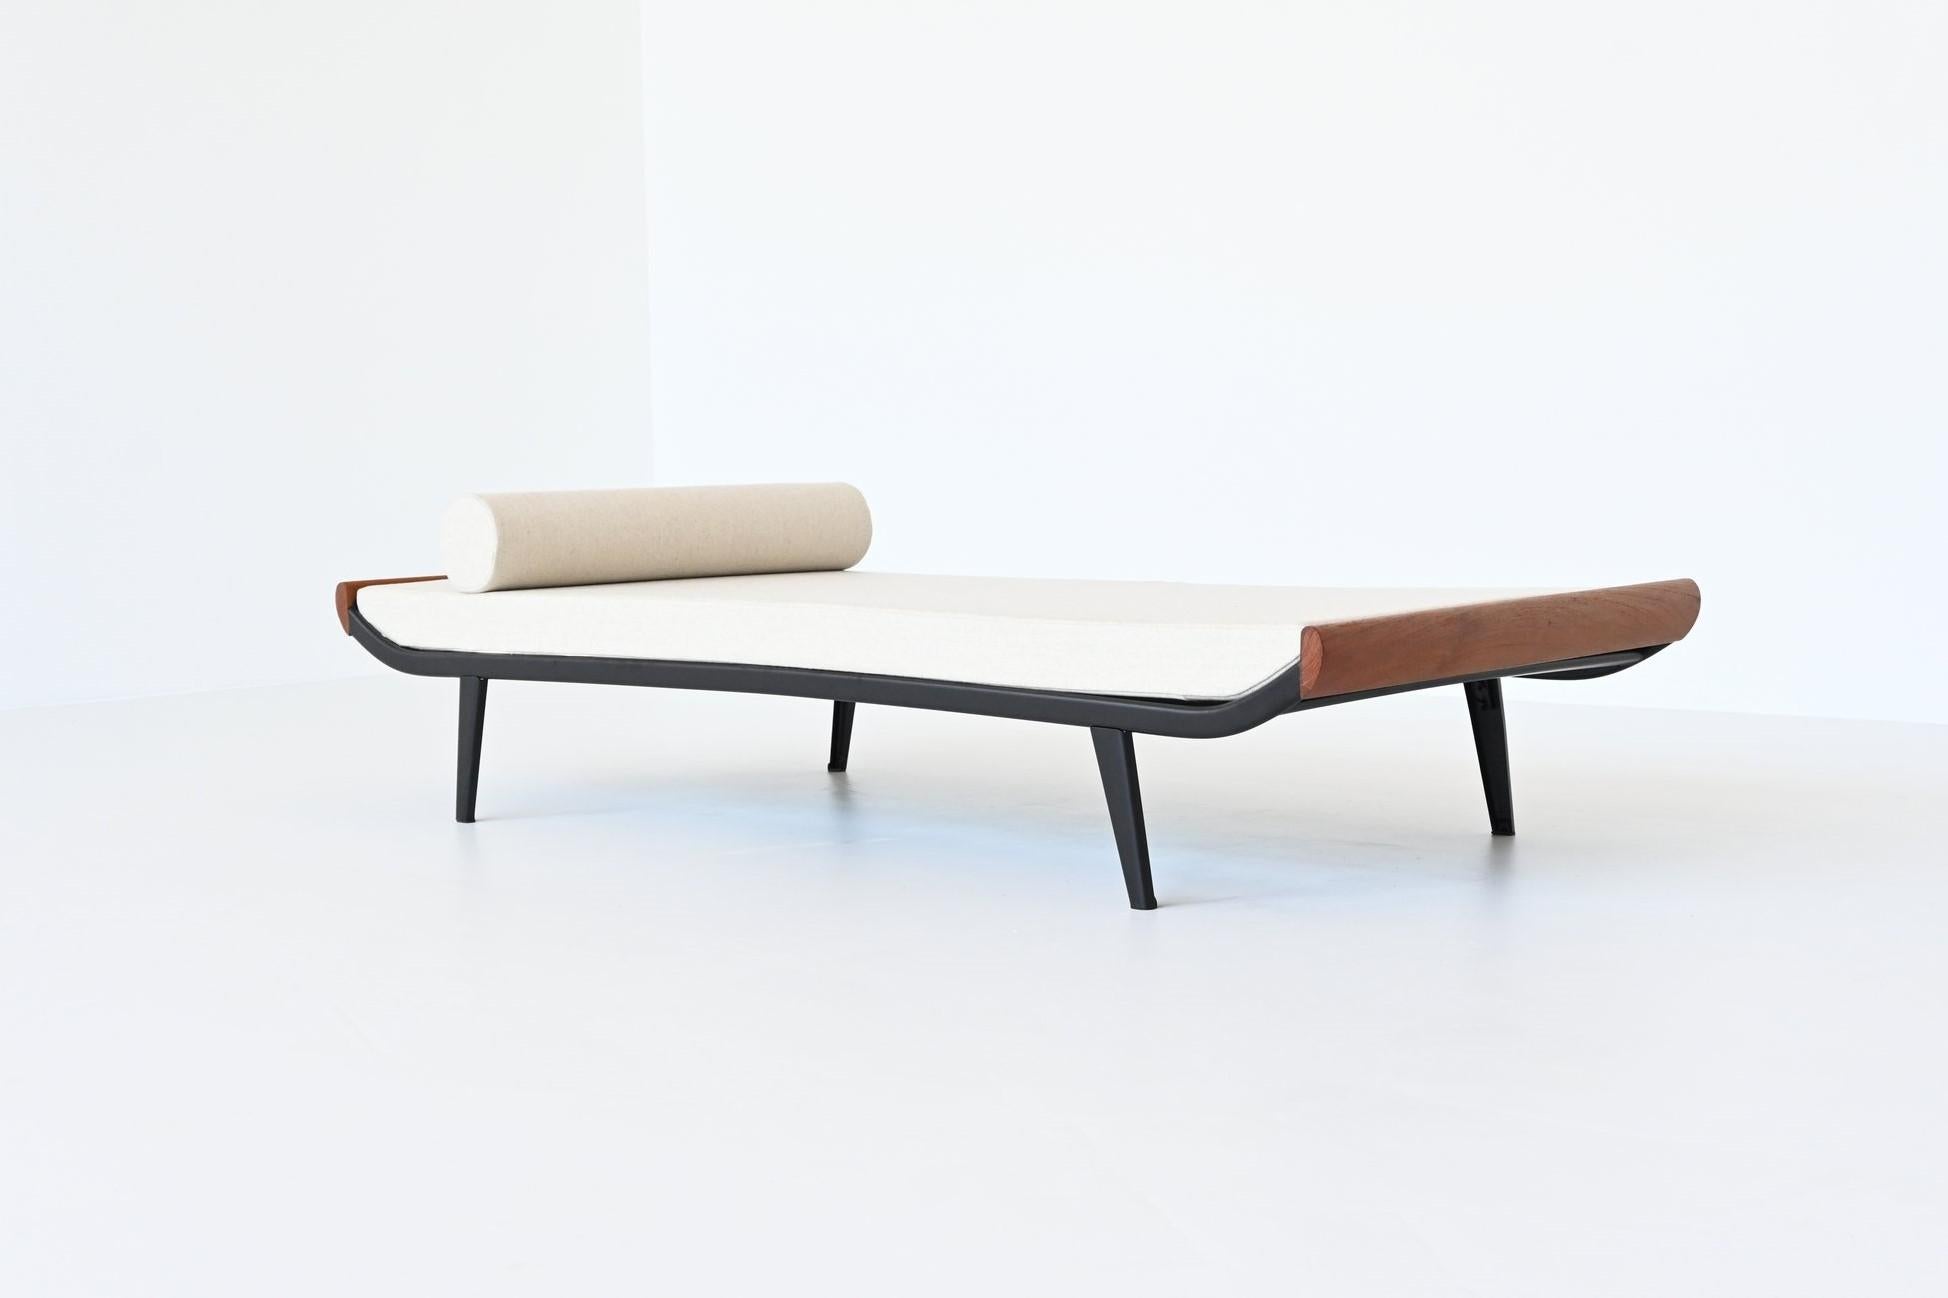 Beautiful and iconic Cleopatra daybed designed by Dick Cordemeijer for Auping, The Netherlands 1954. The frame is made of black coated metal and the ends are in solid teak wood. The mattress is upholstered with high quality off-white wool fabric,